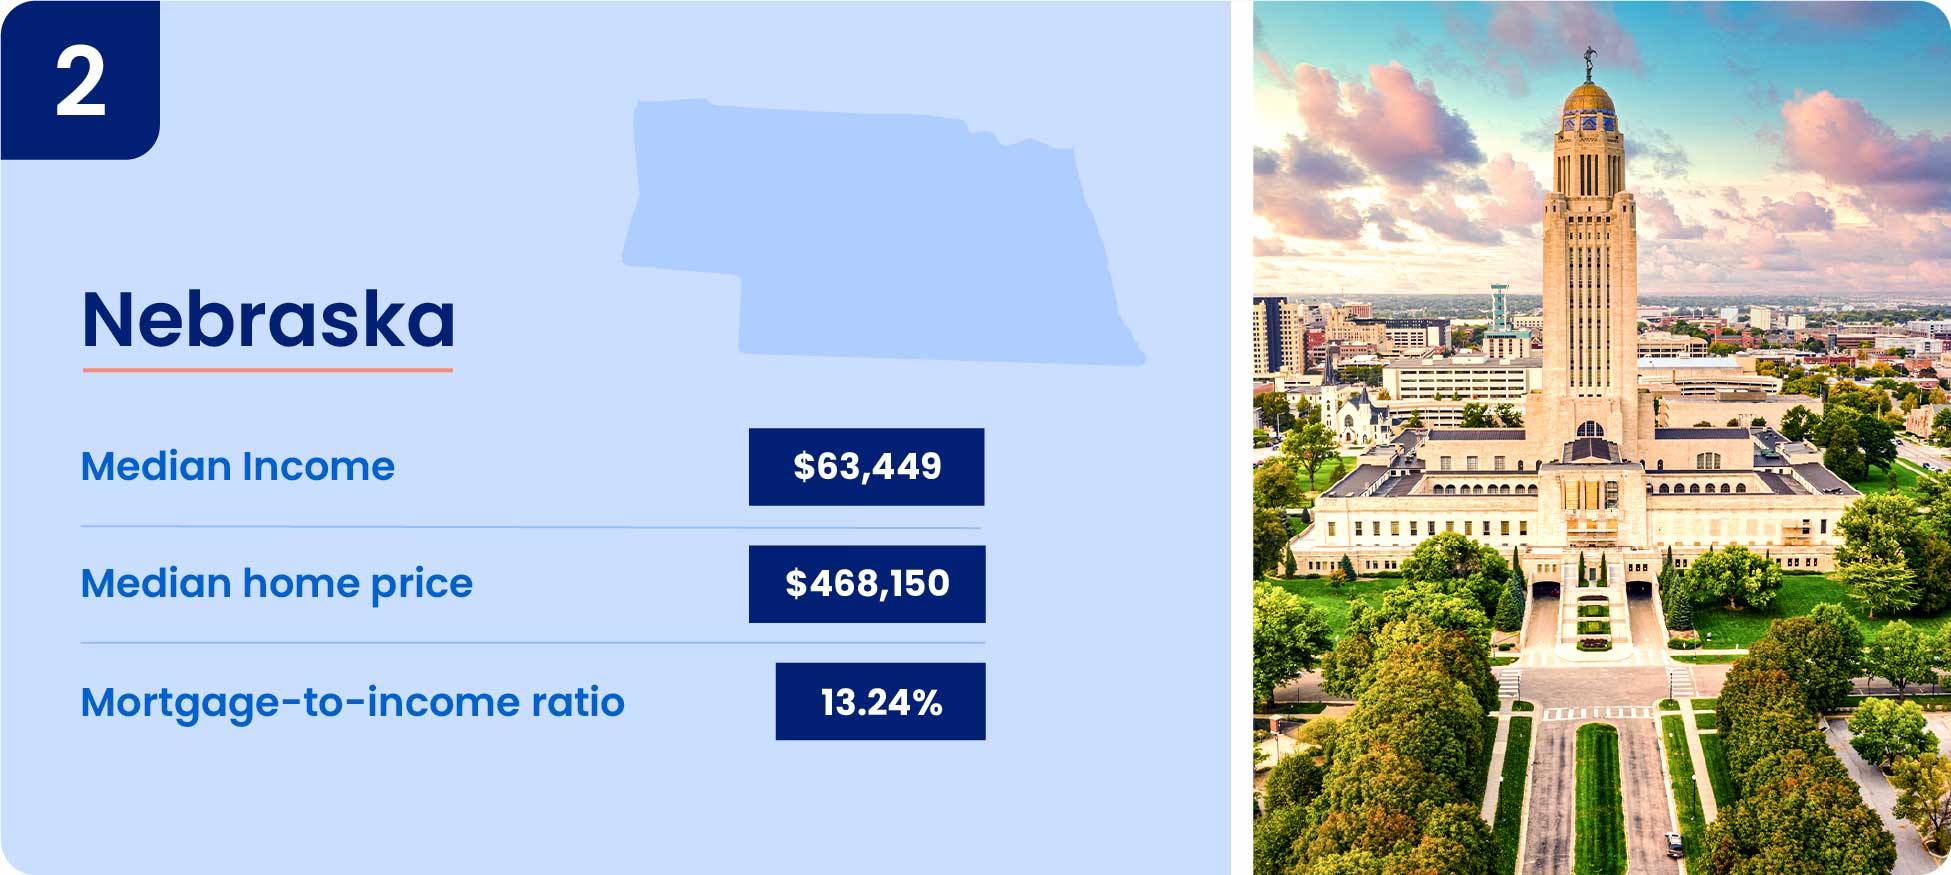 Image shows why one of the cheapest states to buy a house is Nebraska.